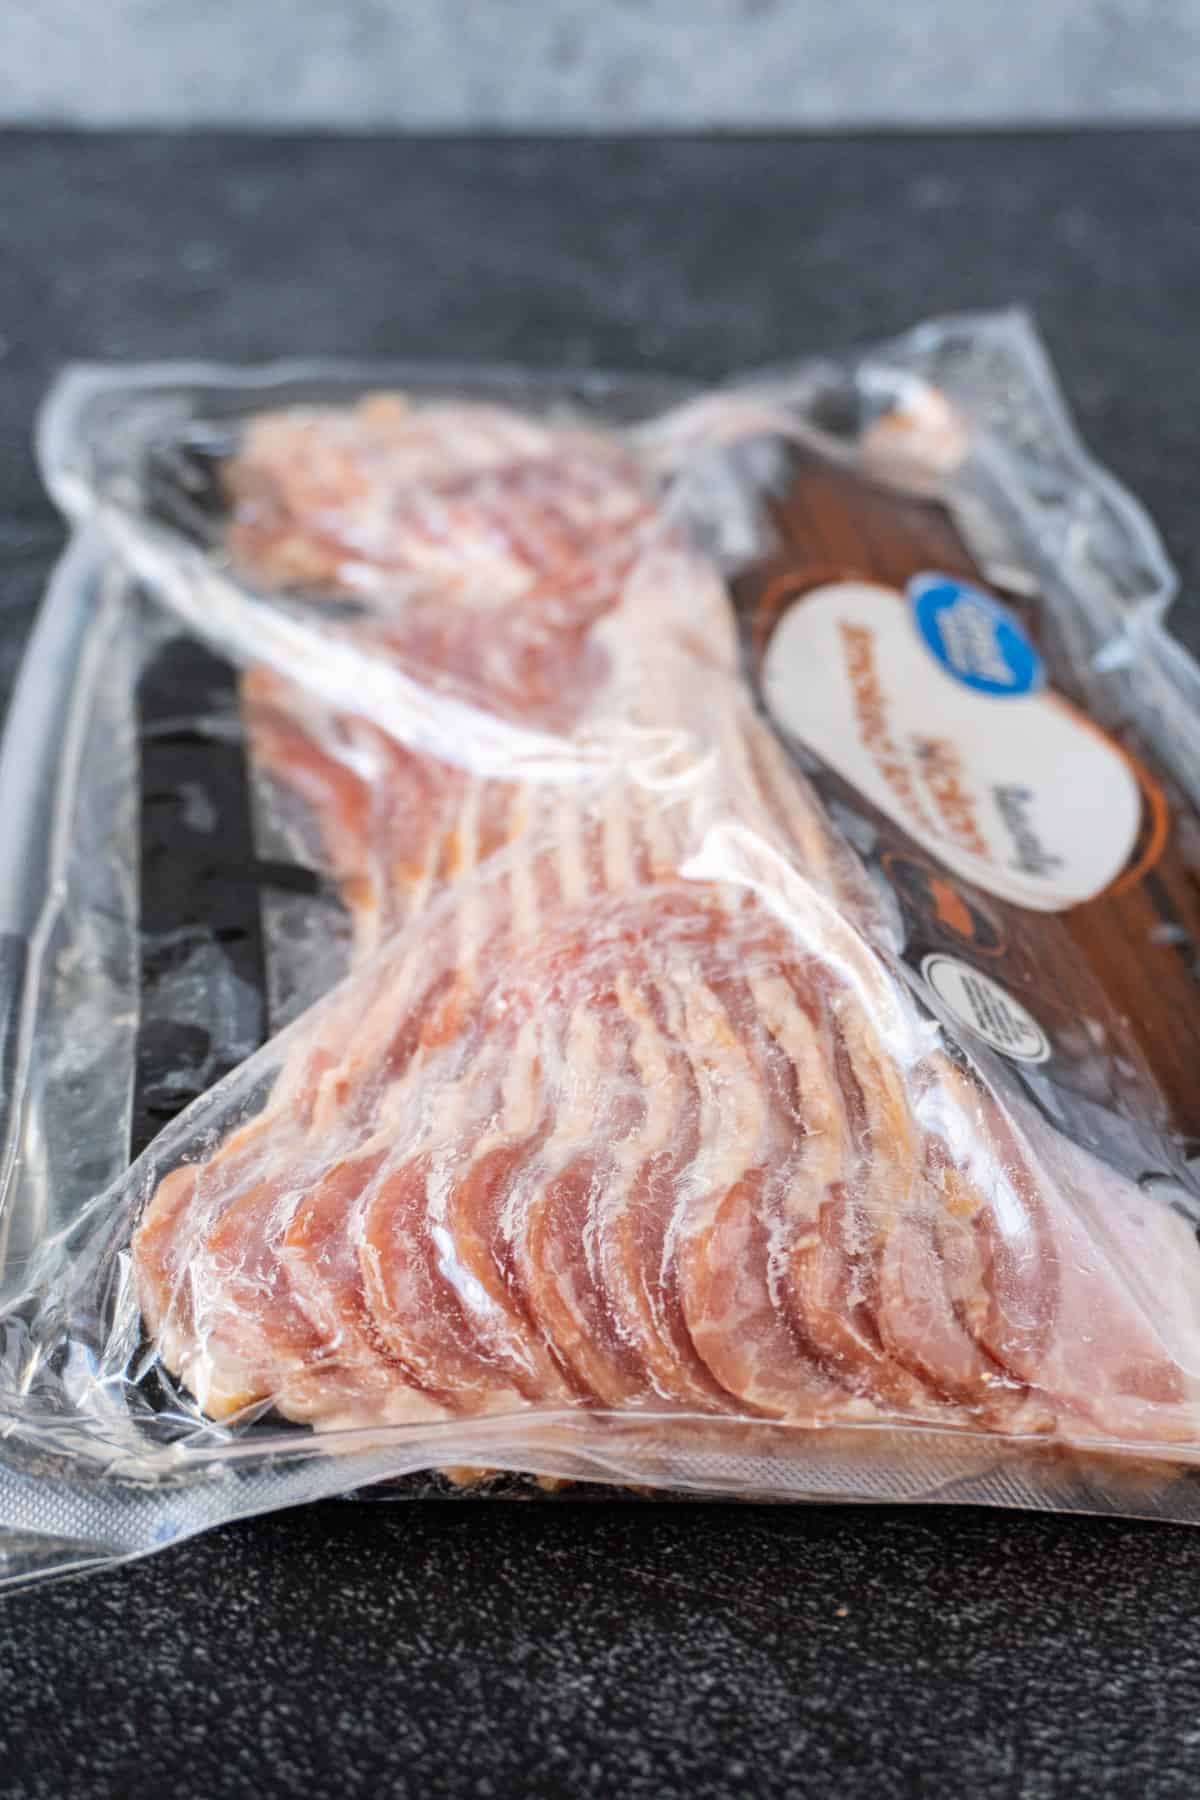 bacon package with bad seal